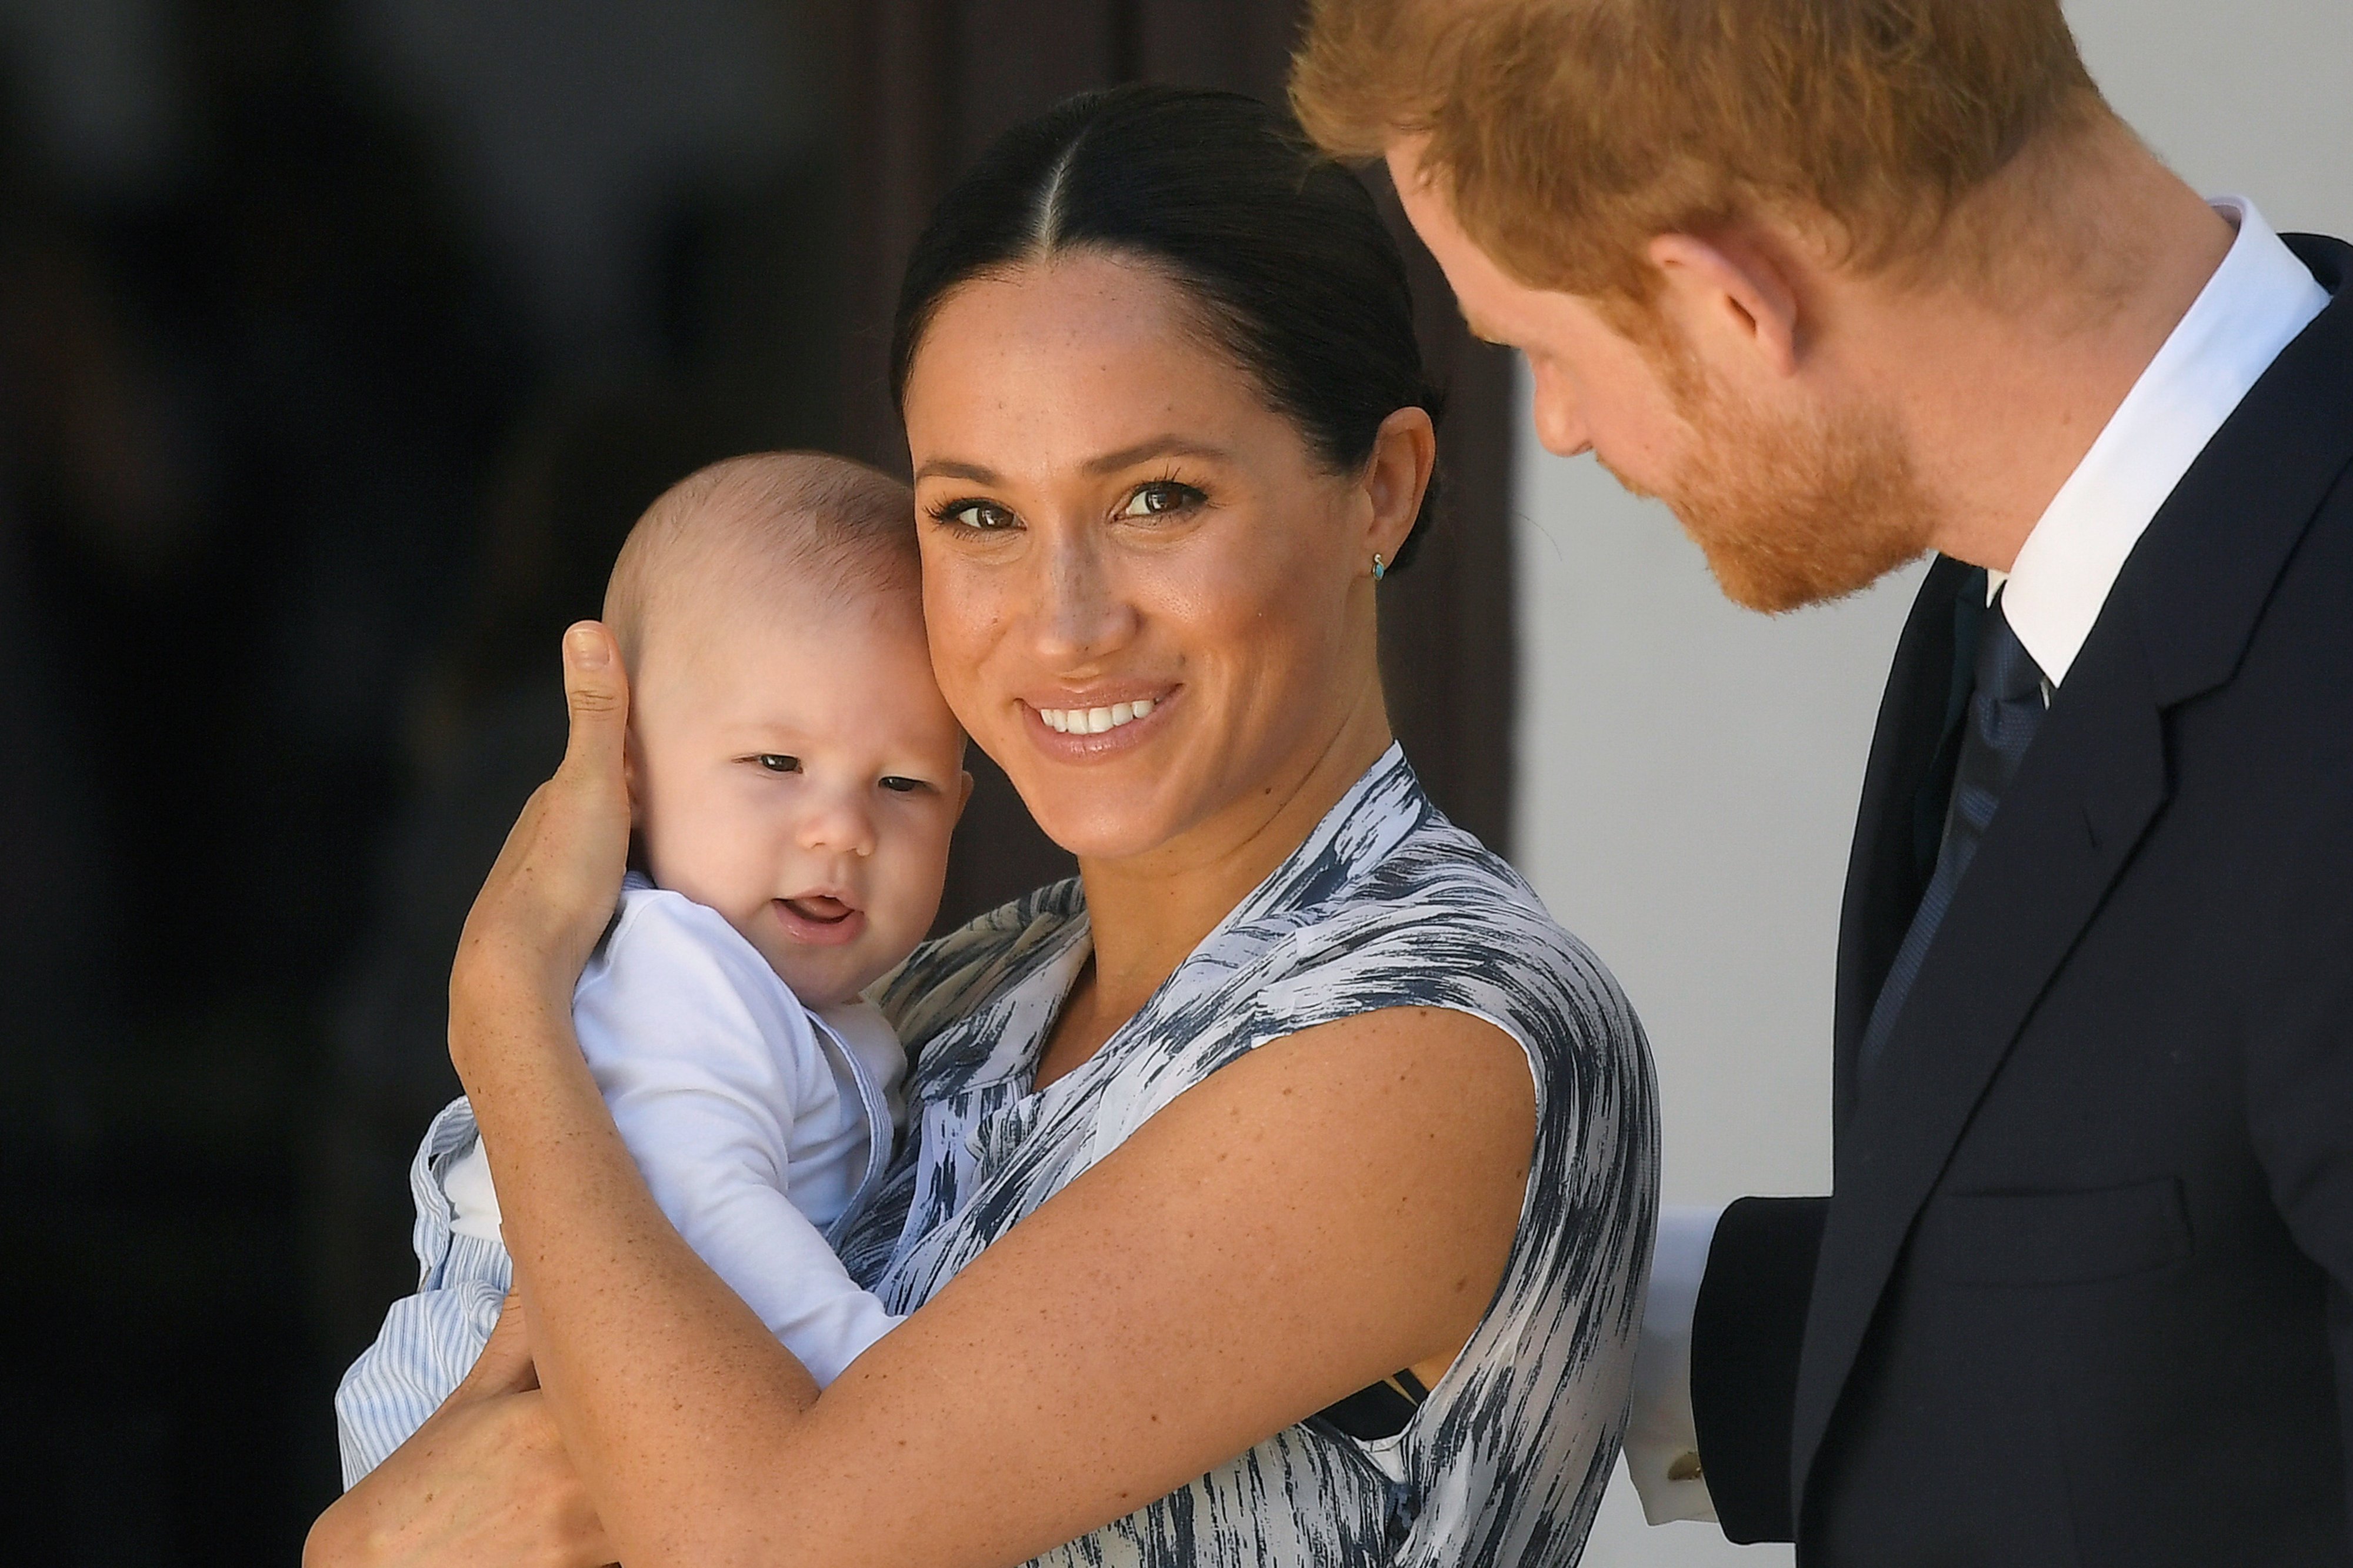 Prince Harry and Meghan Markle with their son Archie on September 25, 2019, in Cape Town, South Africa. | Source: Getty Images.